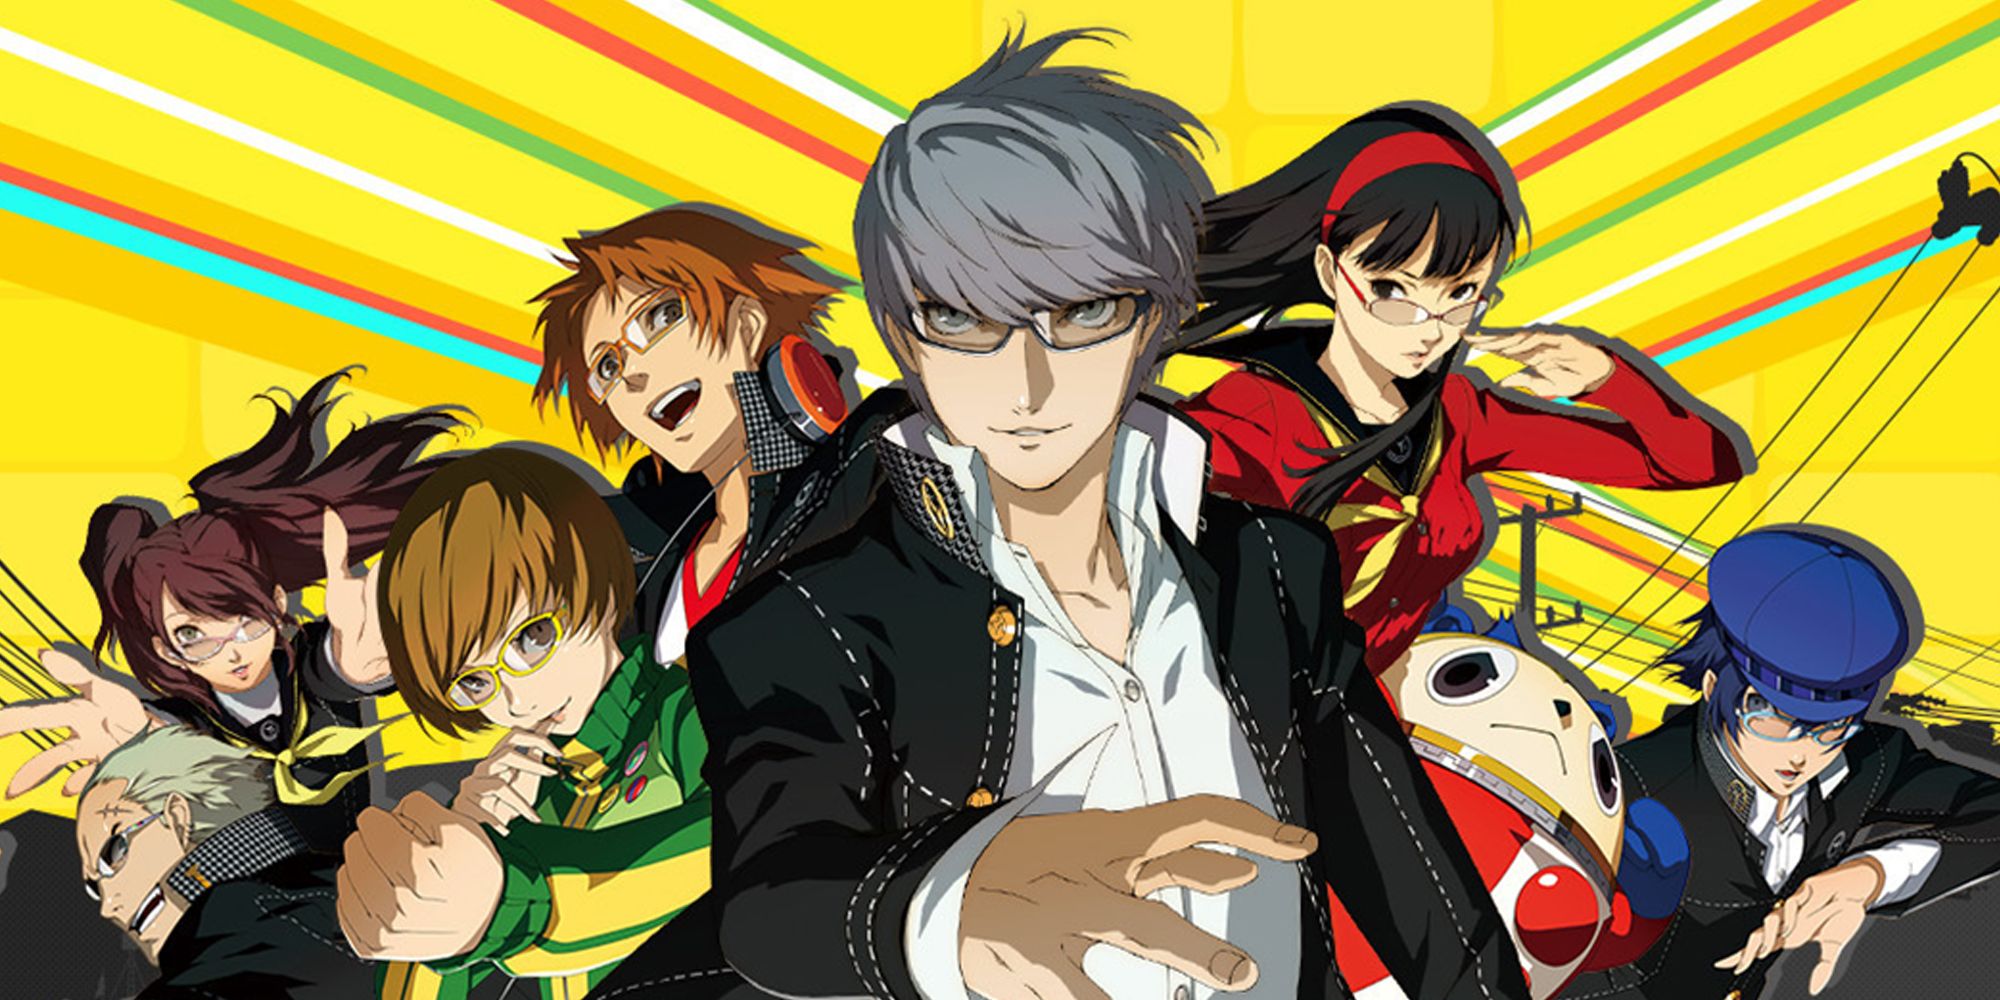 play persona 4 golden on pc